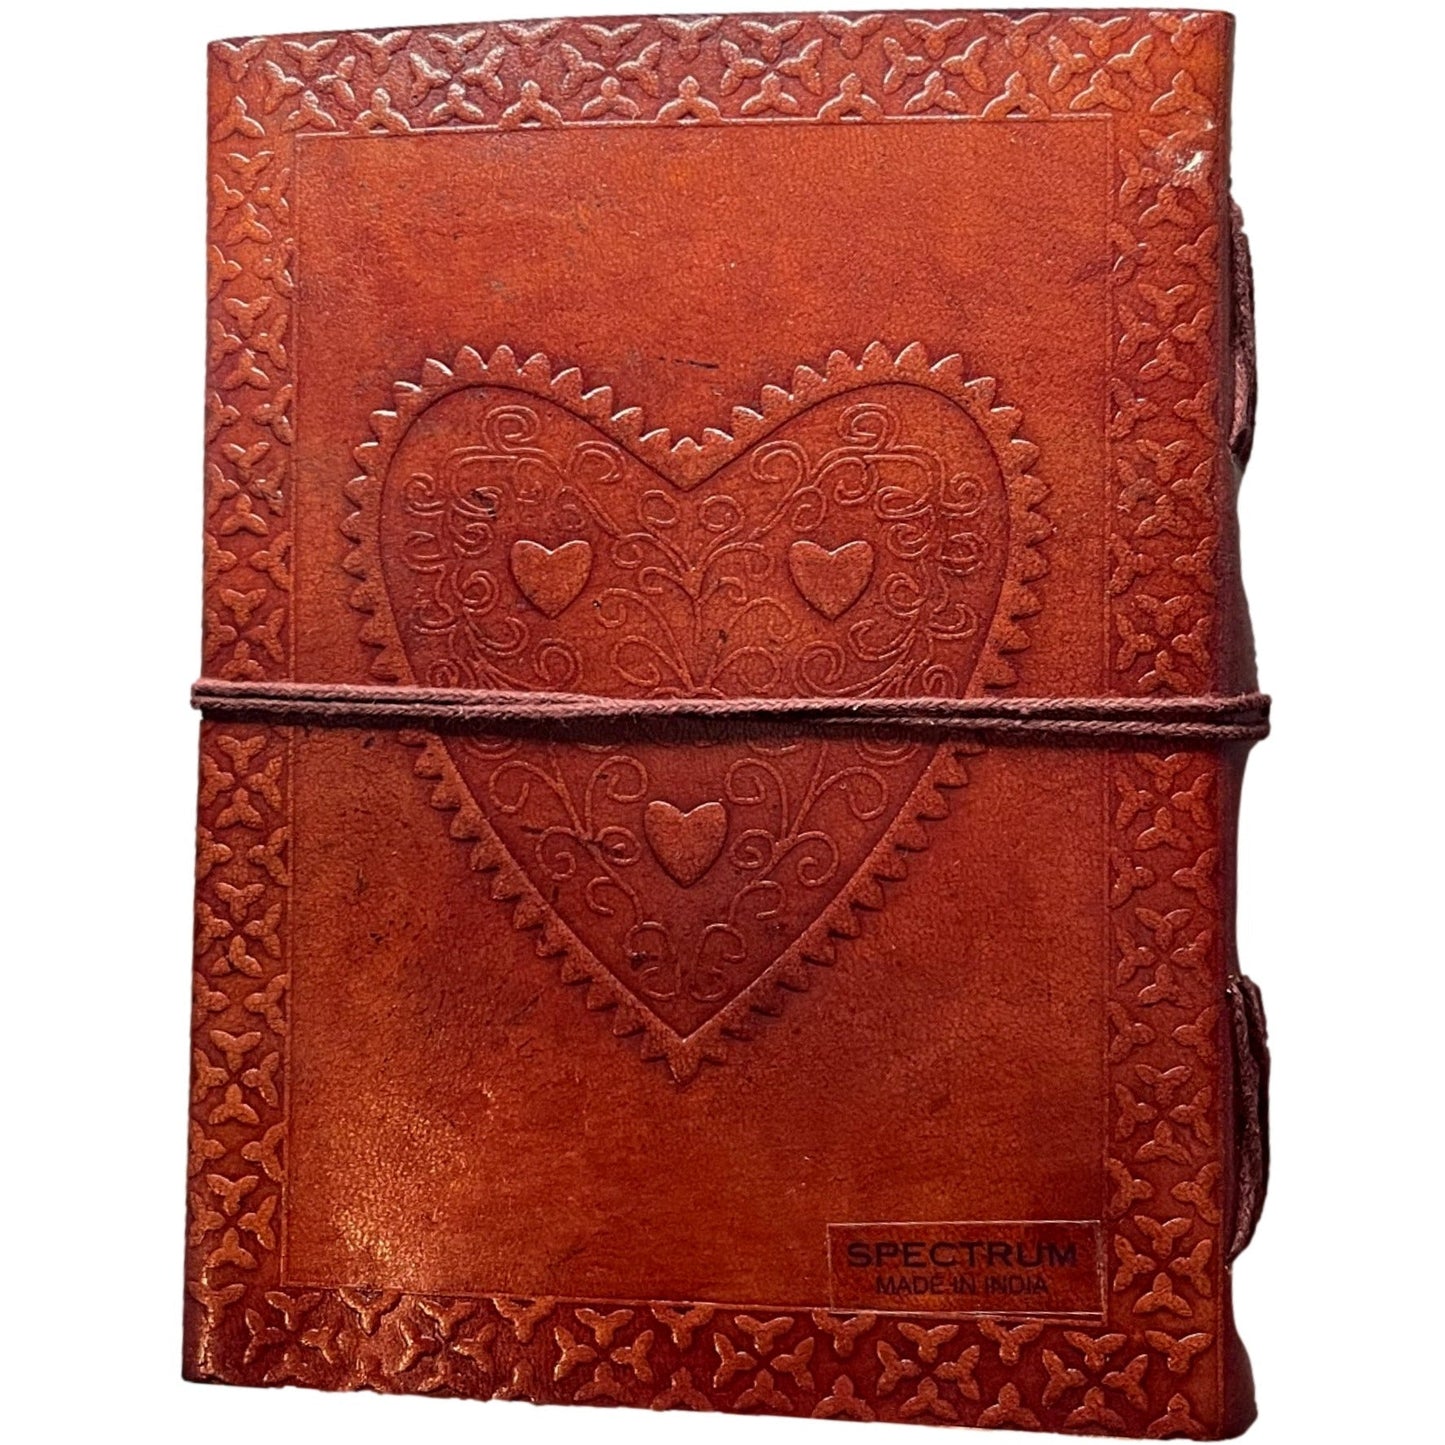 Leather Embroidered Journal Adorned with Gemstone Crystals & Leather String Closure